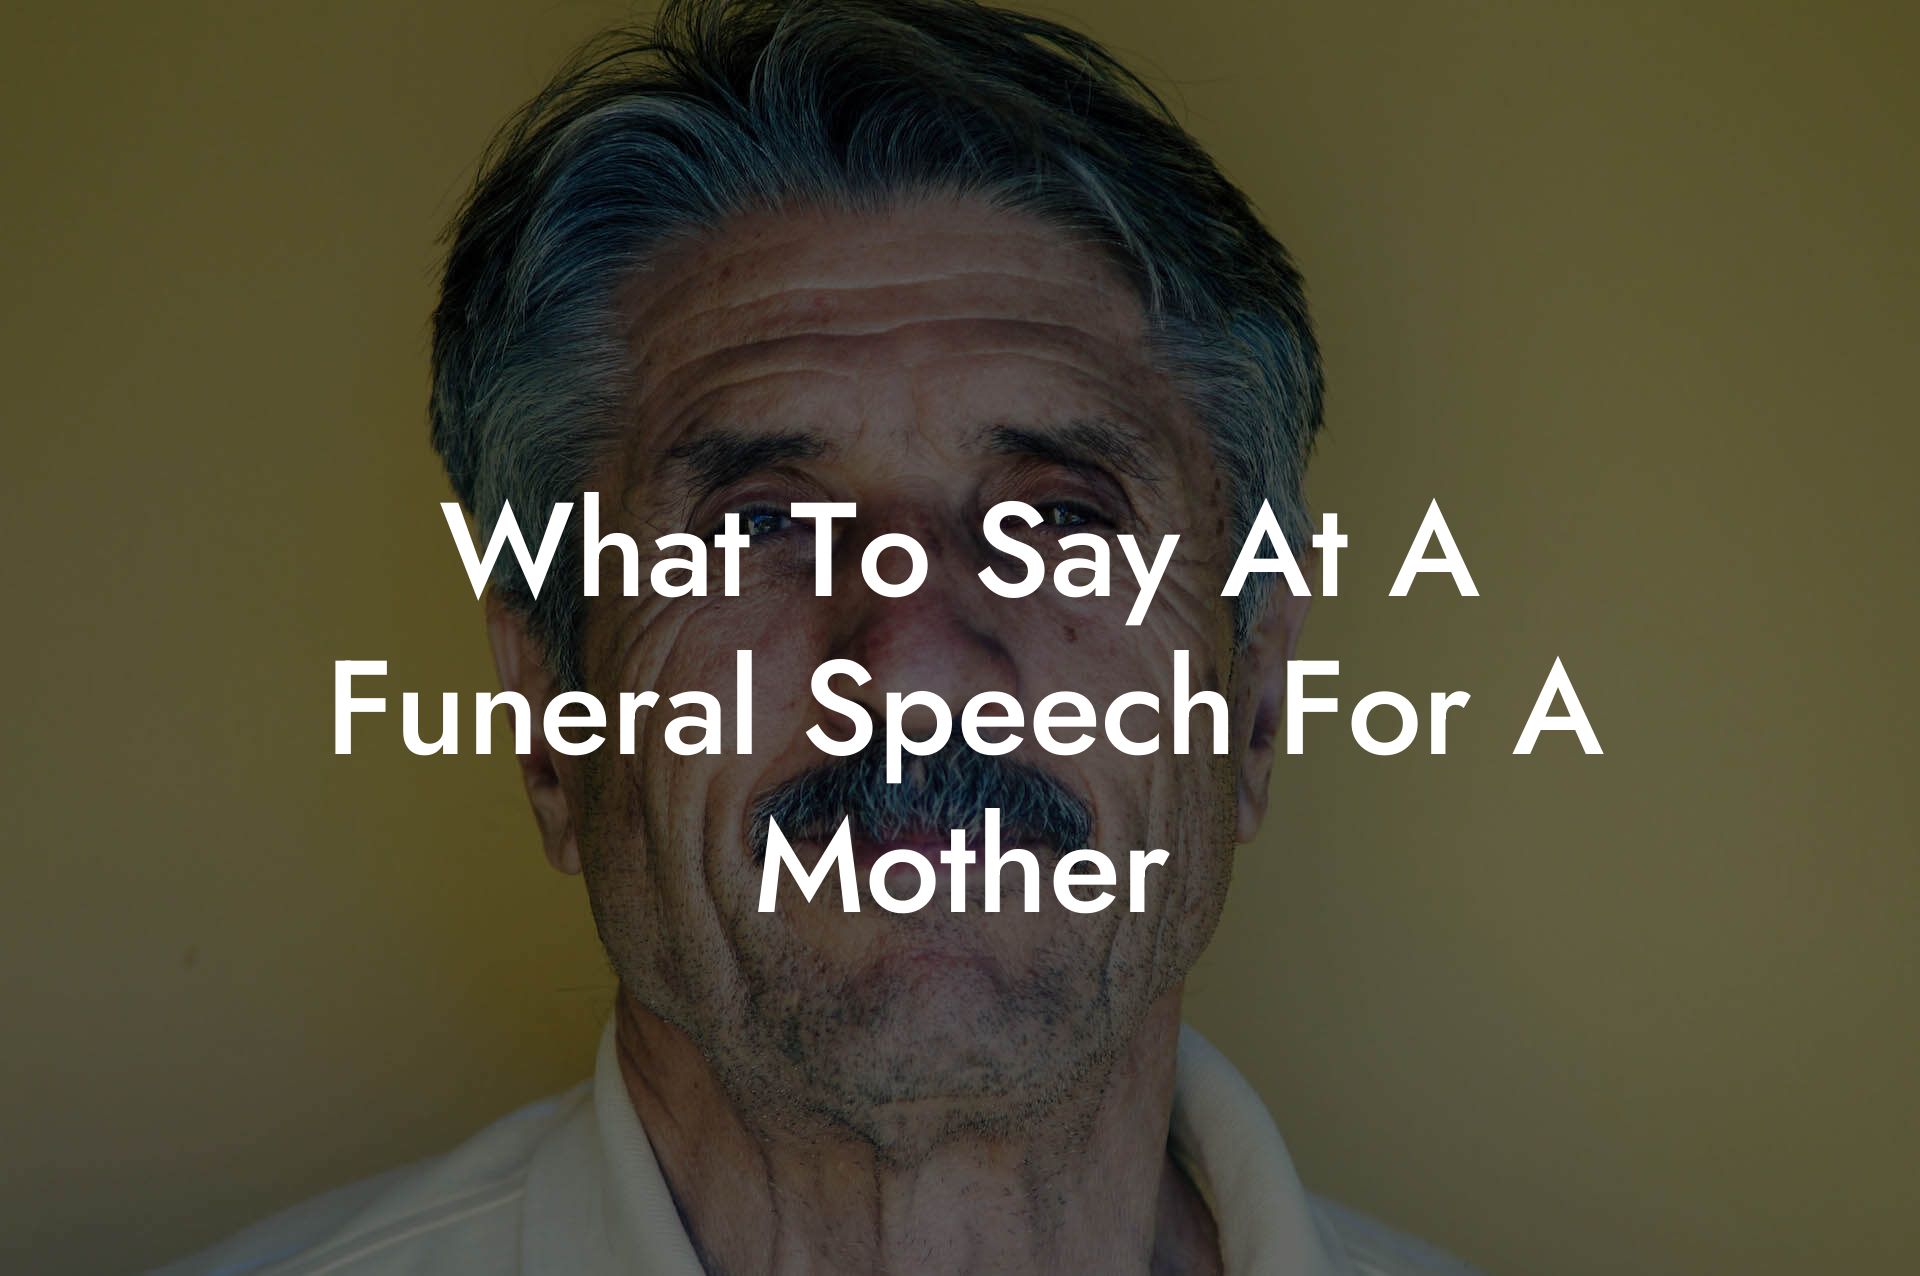 What To Say At A Funeral Speech For A Mother